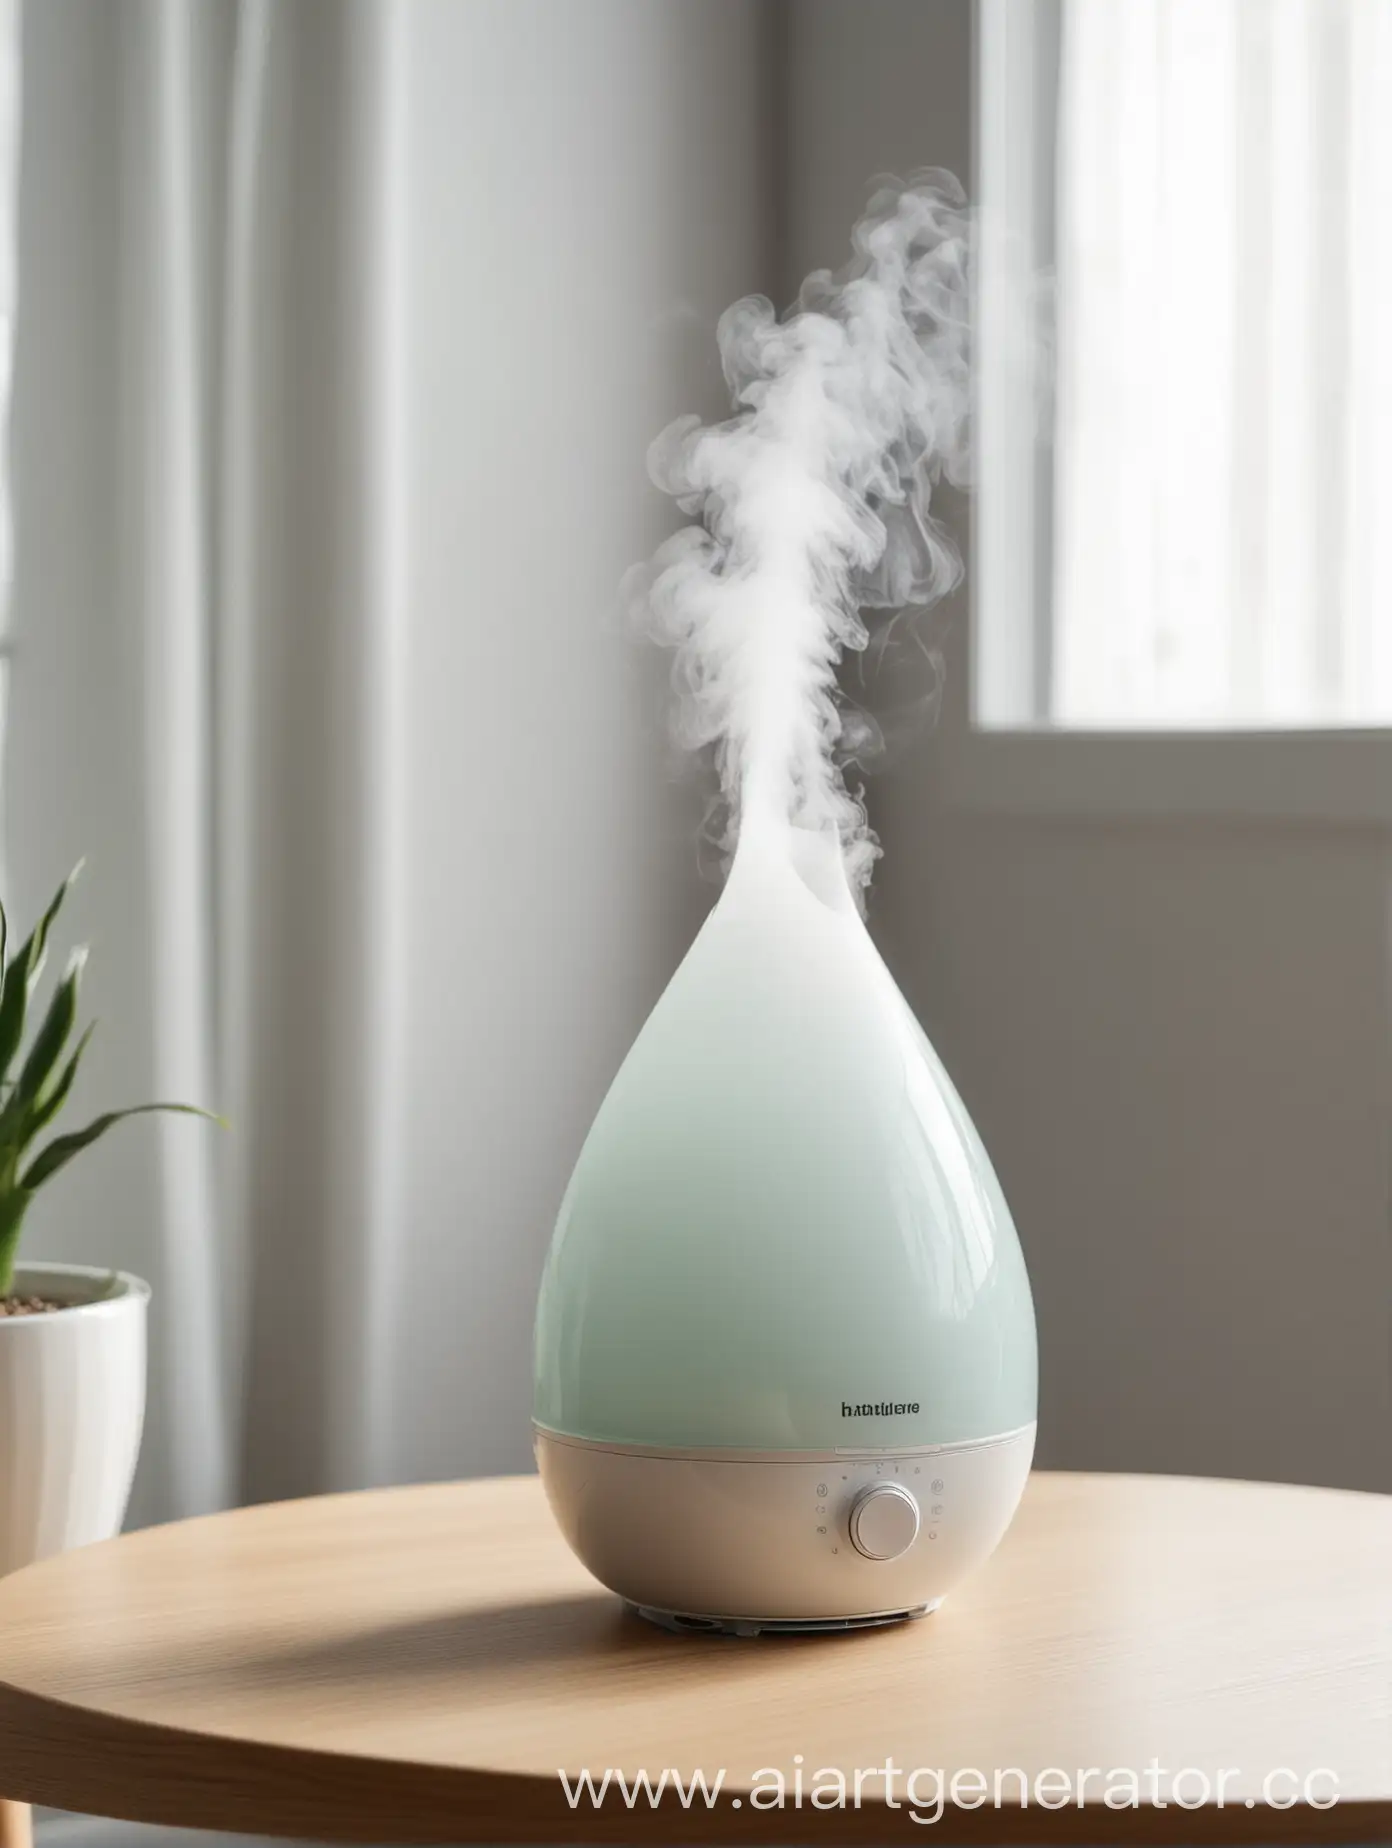 Room-Air-Humidifier-on-Table